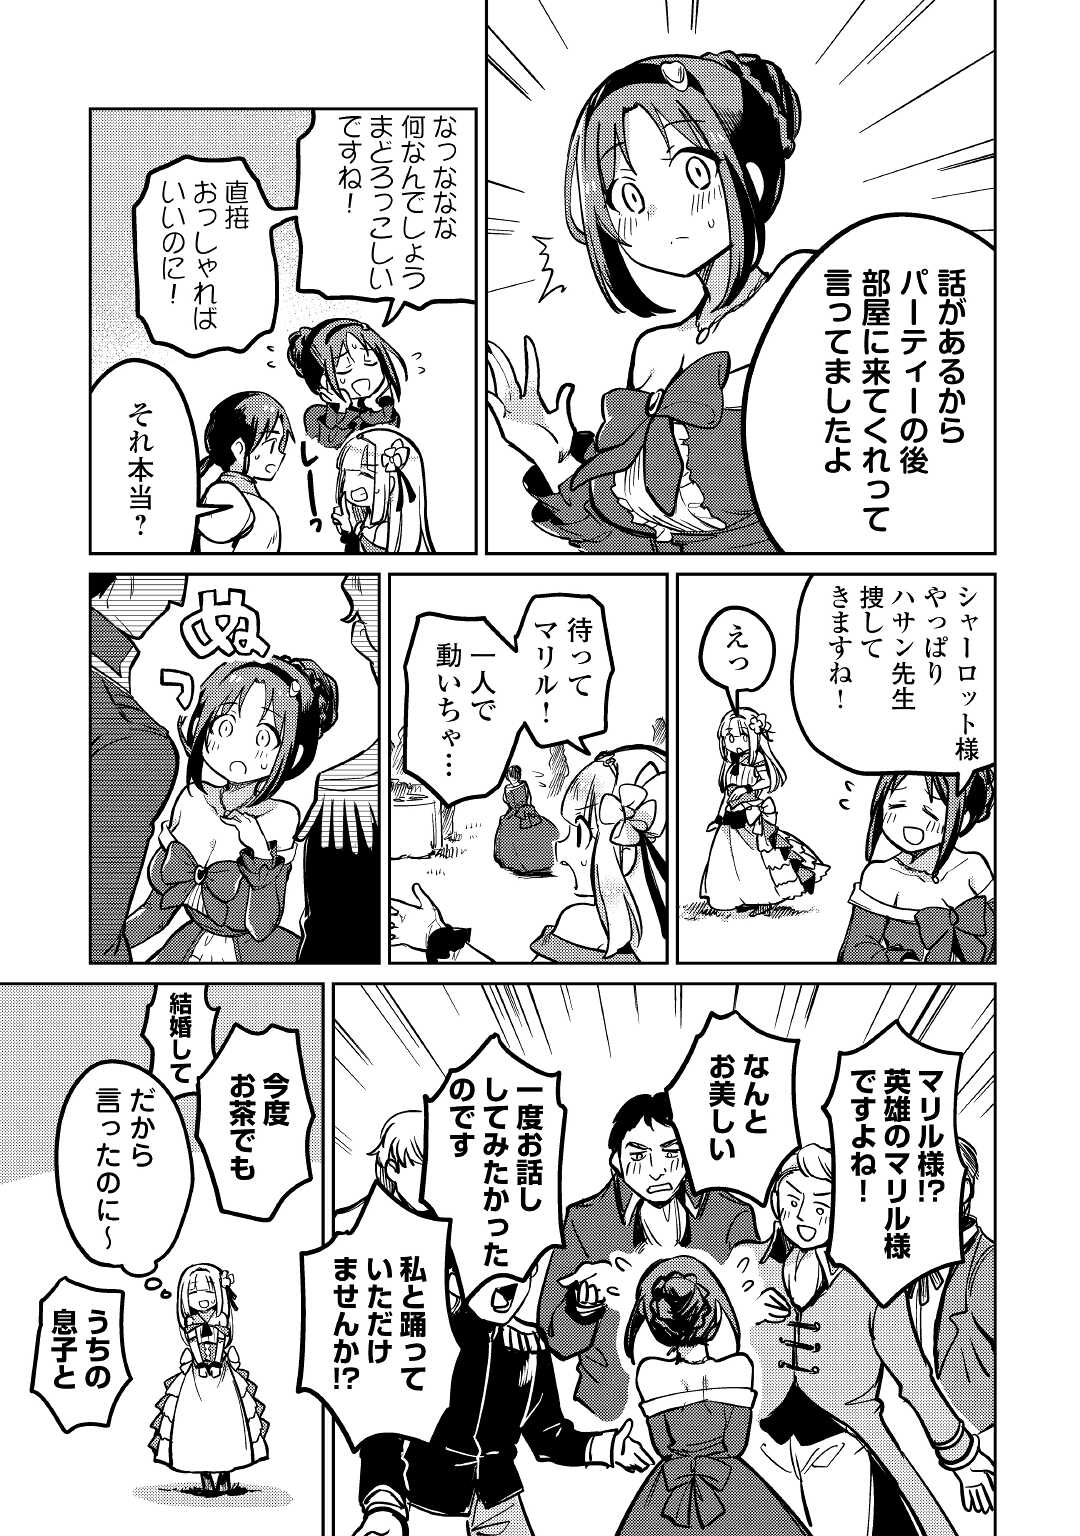 The Former Structural Researcher’s Story of Otherworldly Adventure 第42話 - Page 9